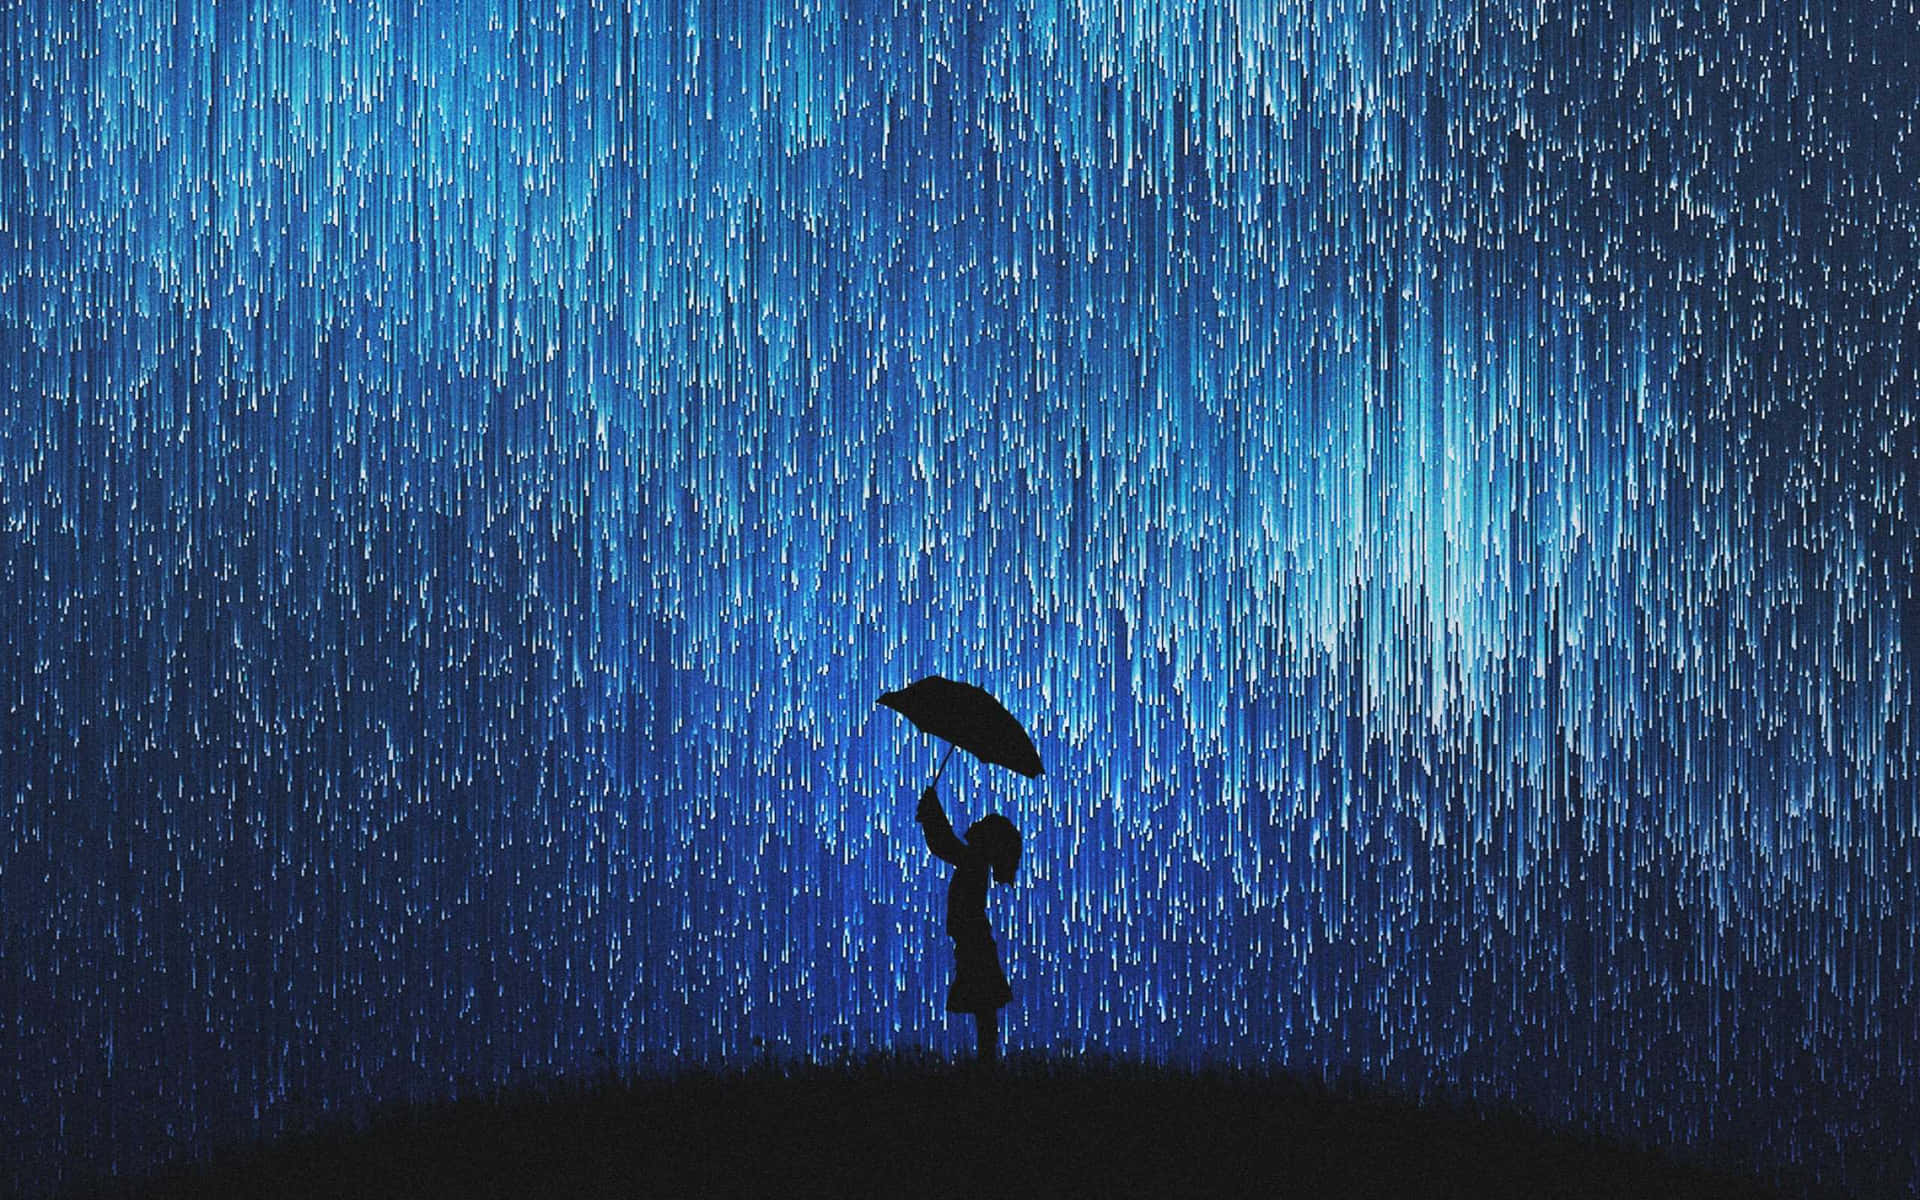 Rain Rain Down The Hd Wallpaper Background, Pictures Of The Rain, Rain,  Happy Background Image And Wallpaper for Free Download